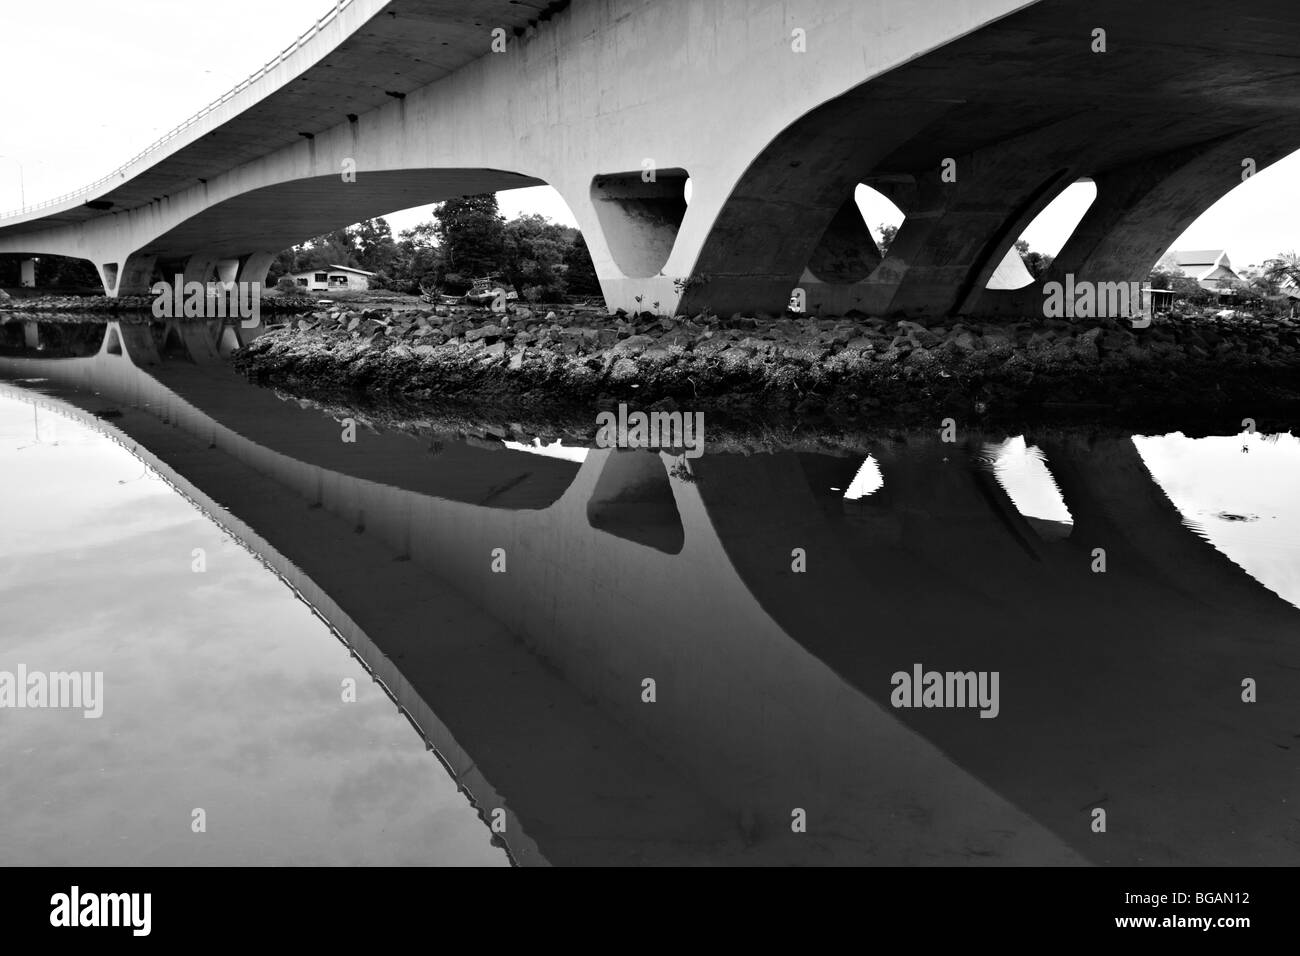 Curved bridge and reflection in black and white. Stock Photo